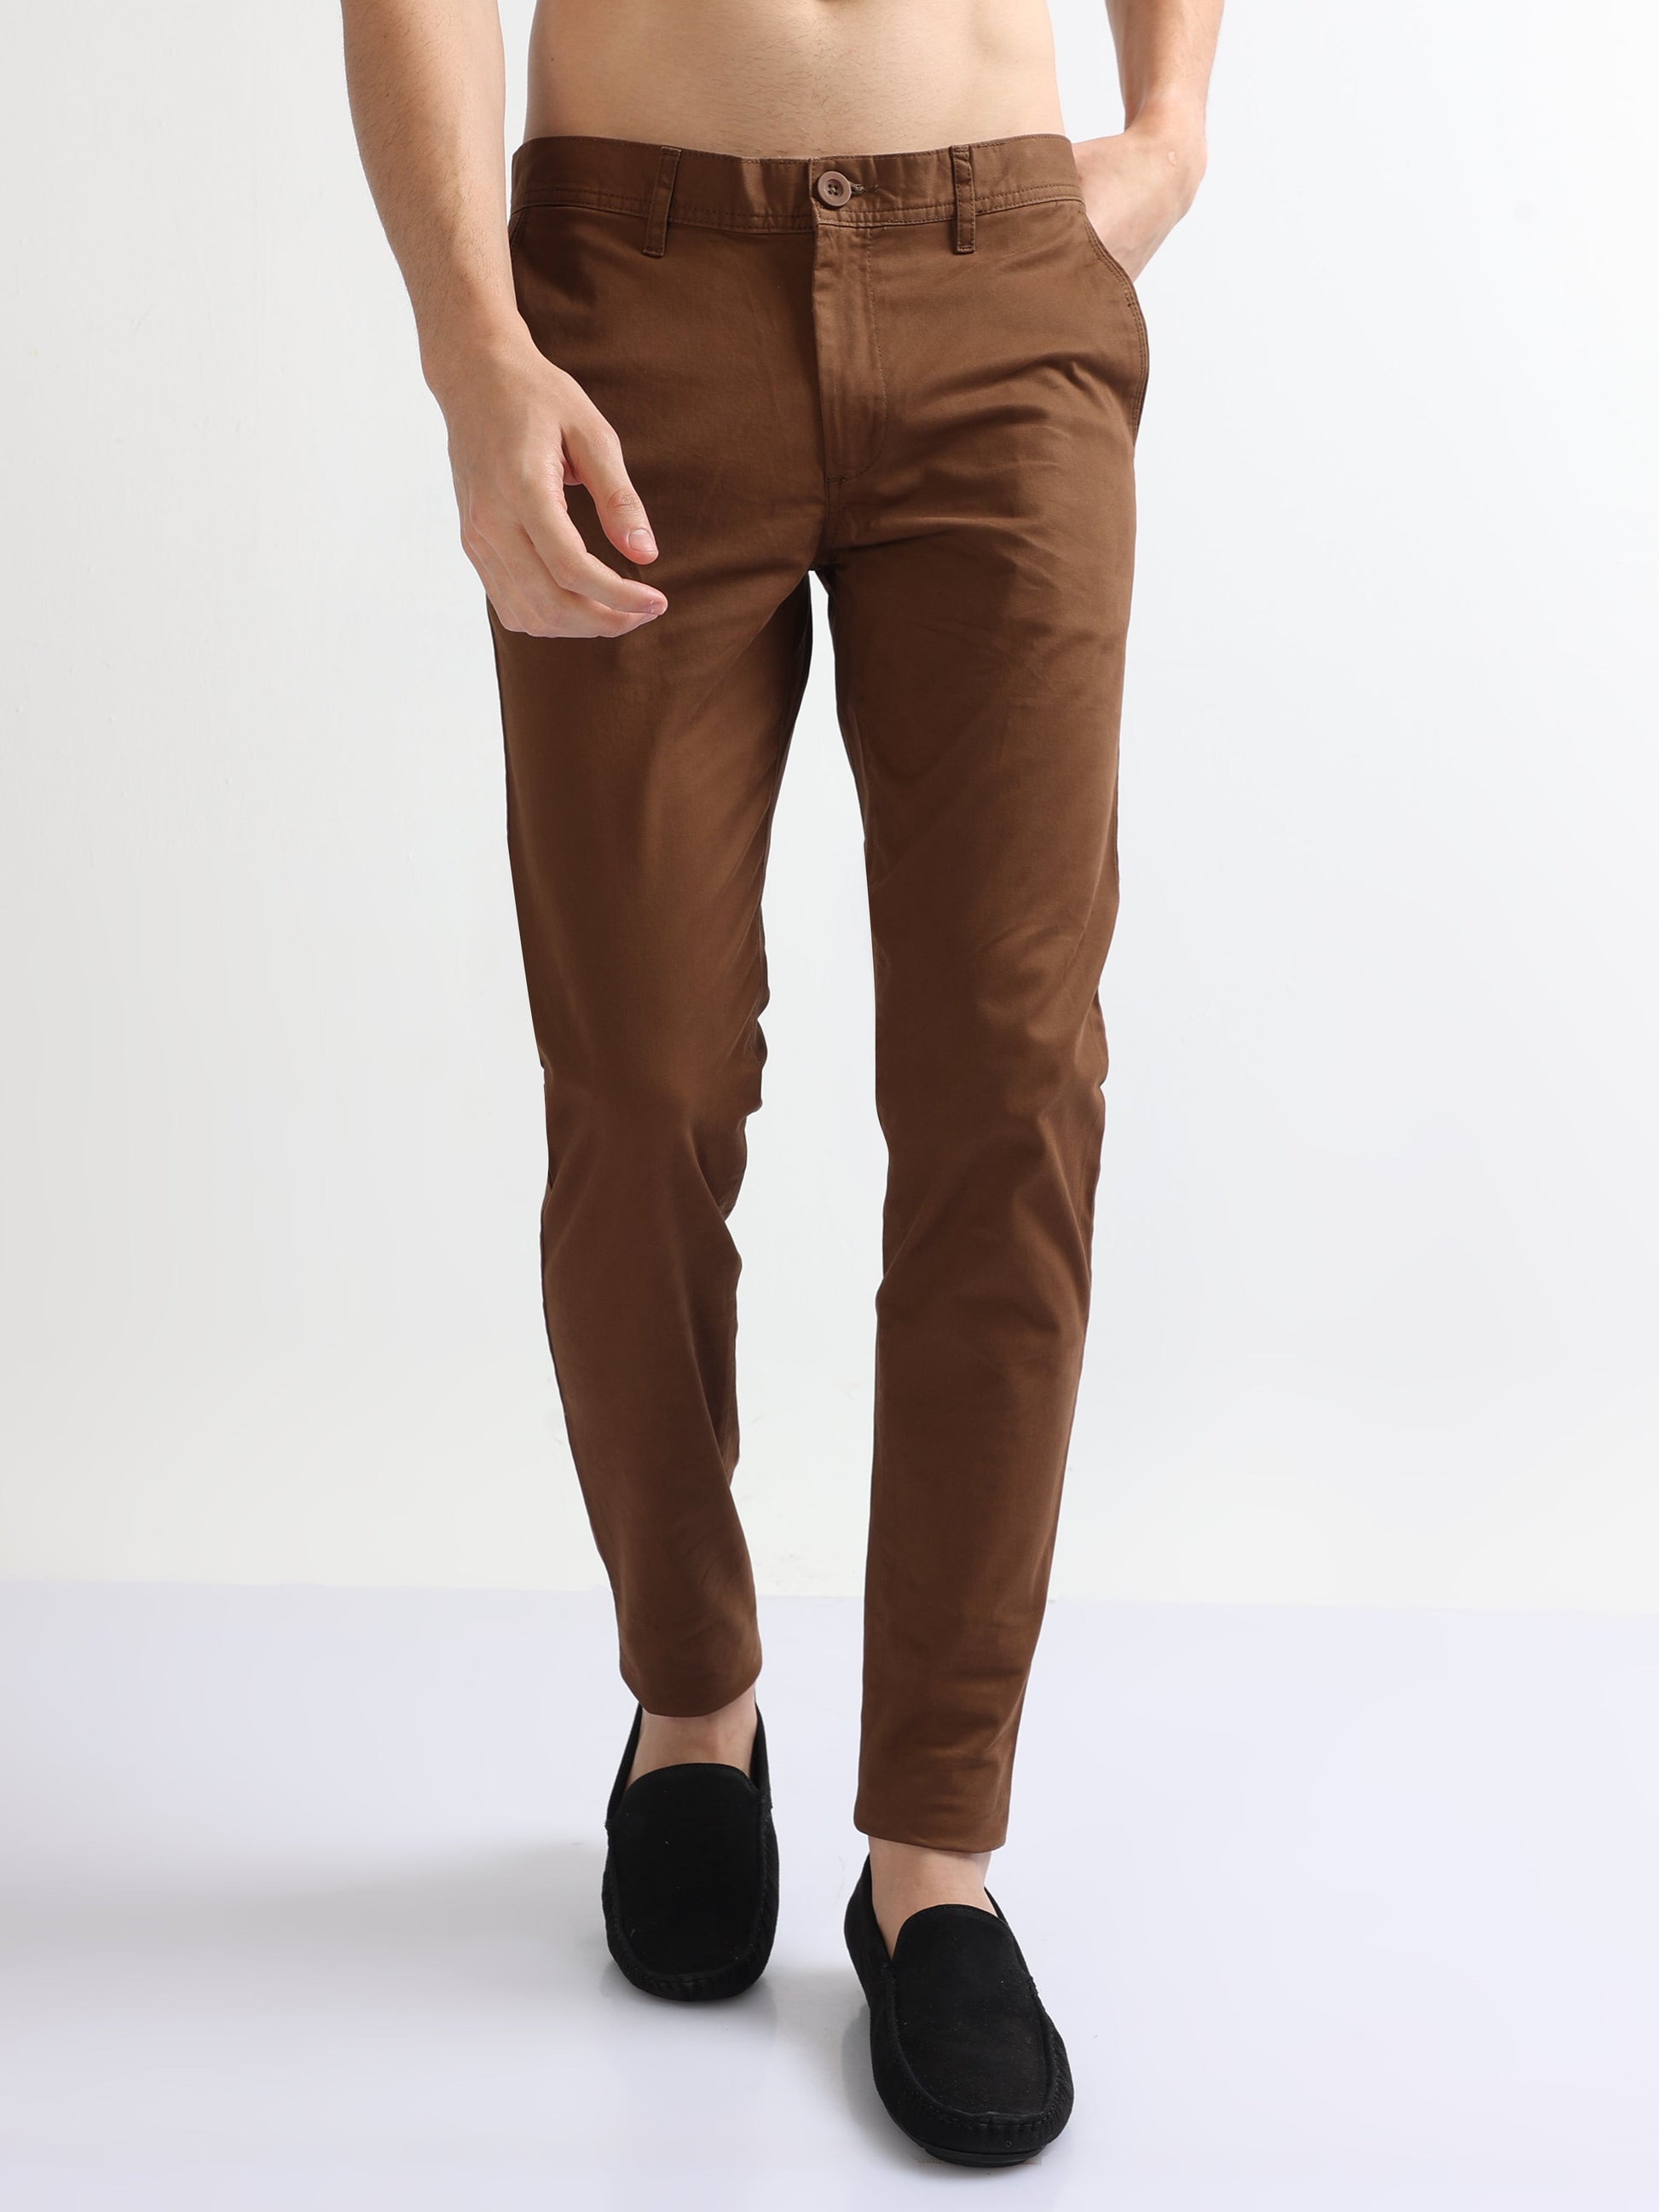 Brown Men's Cotton Twill Stretch Trousers